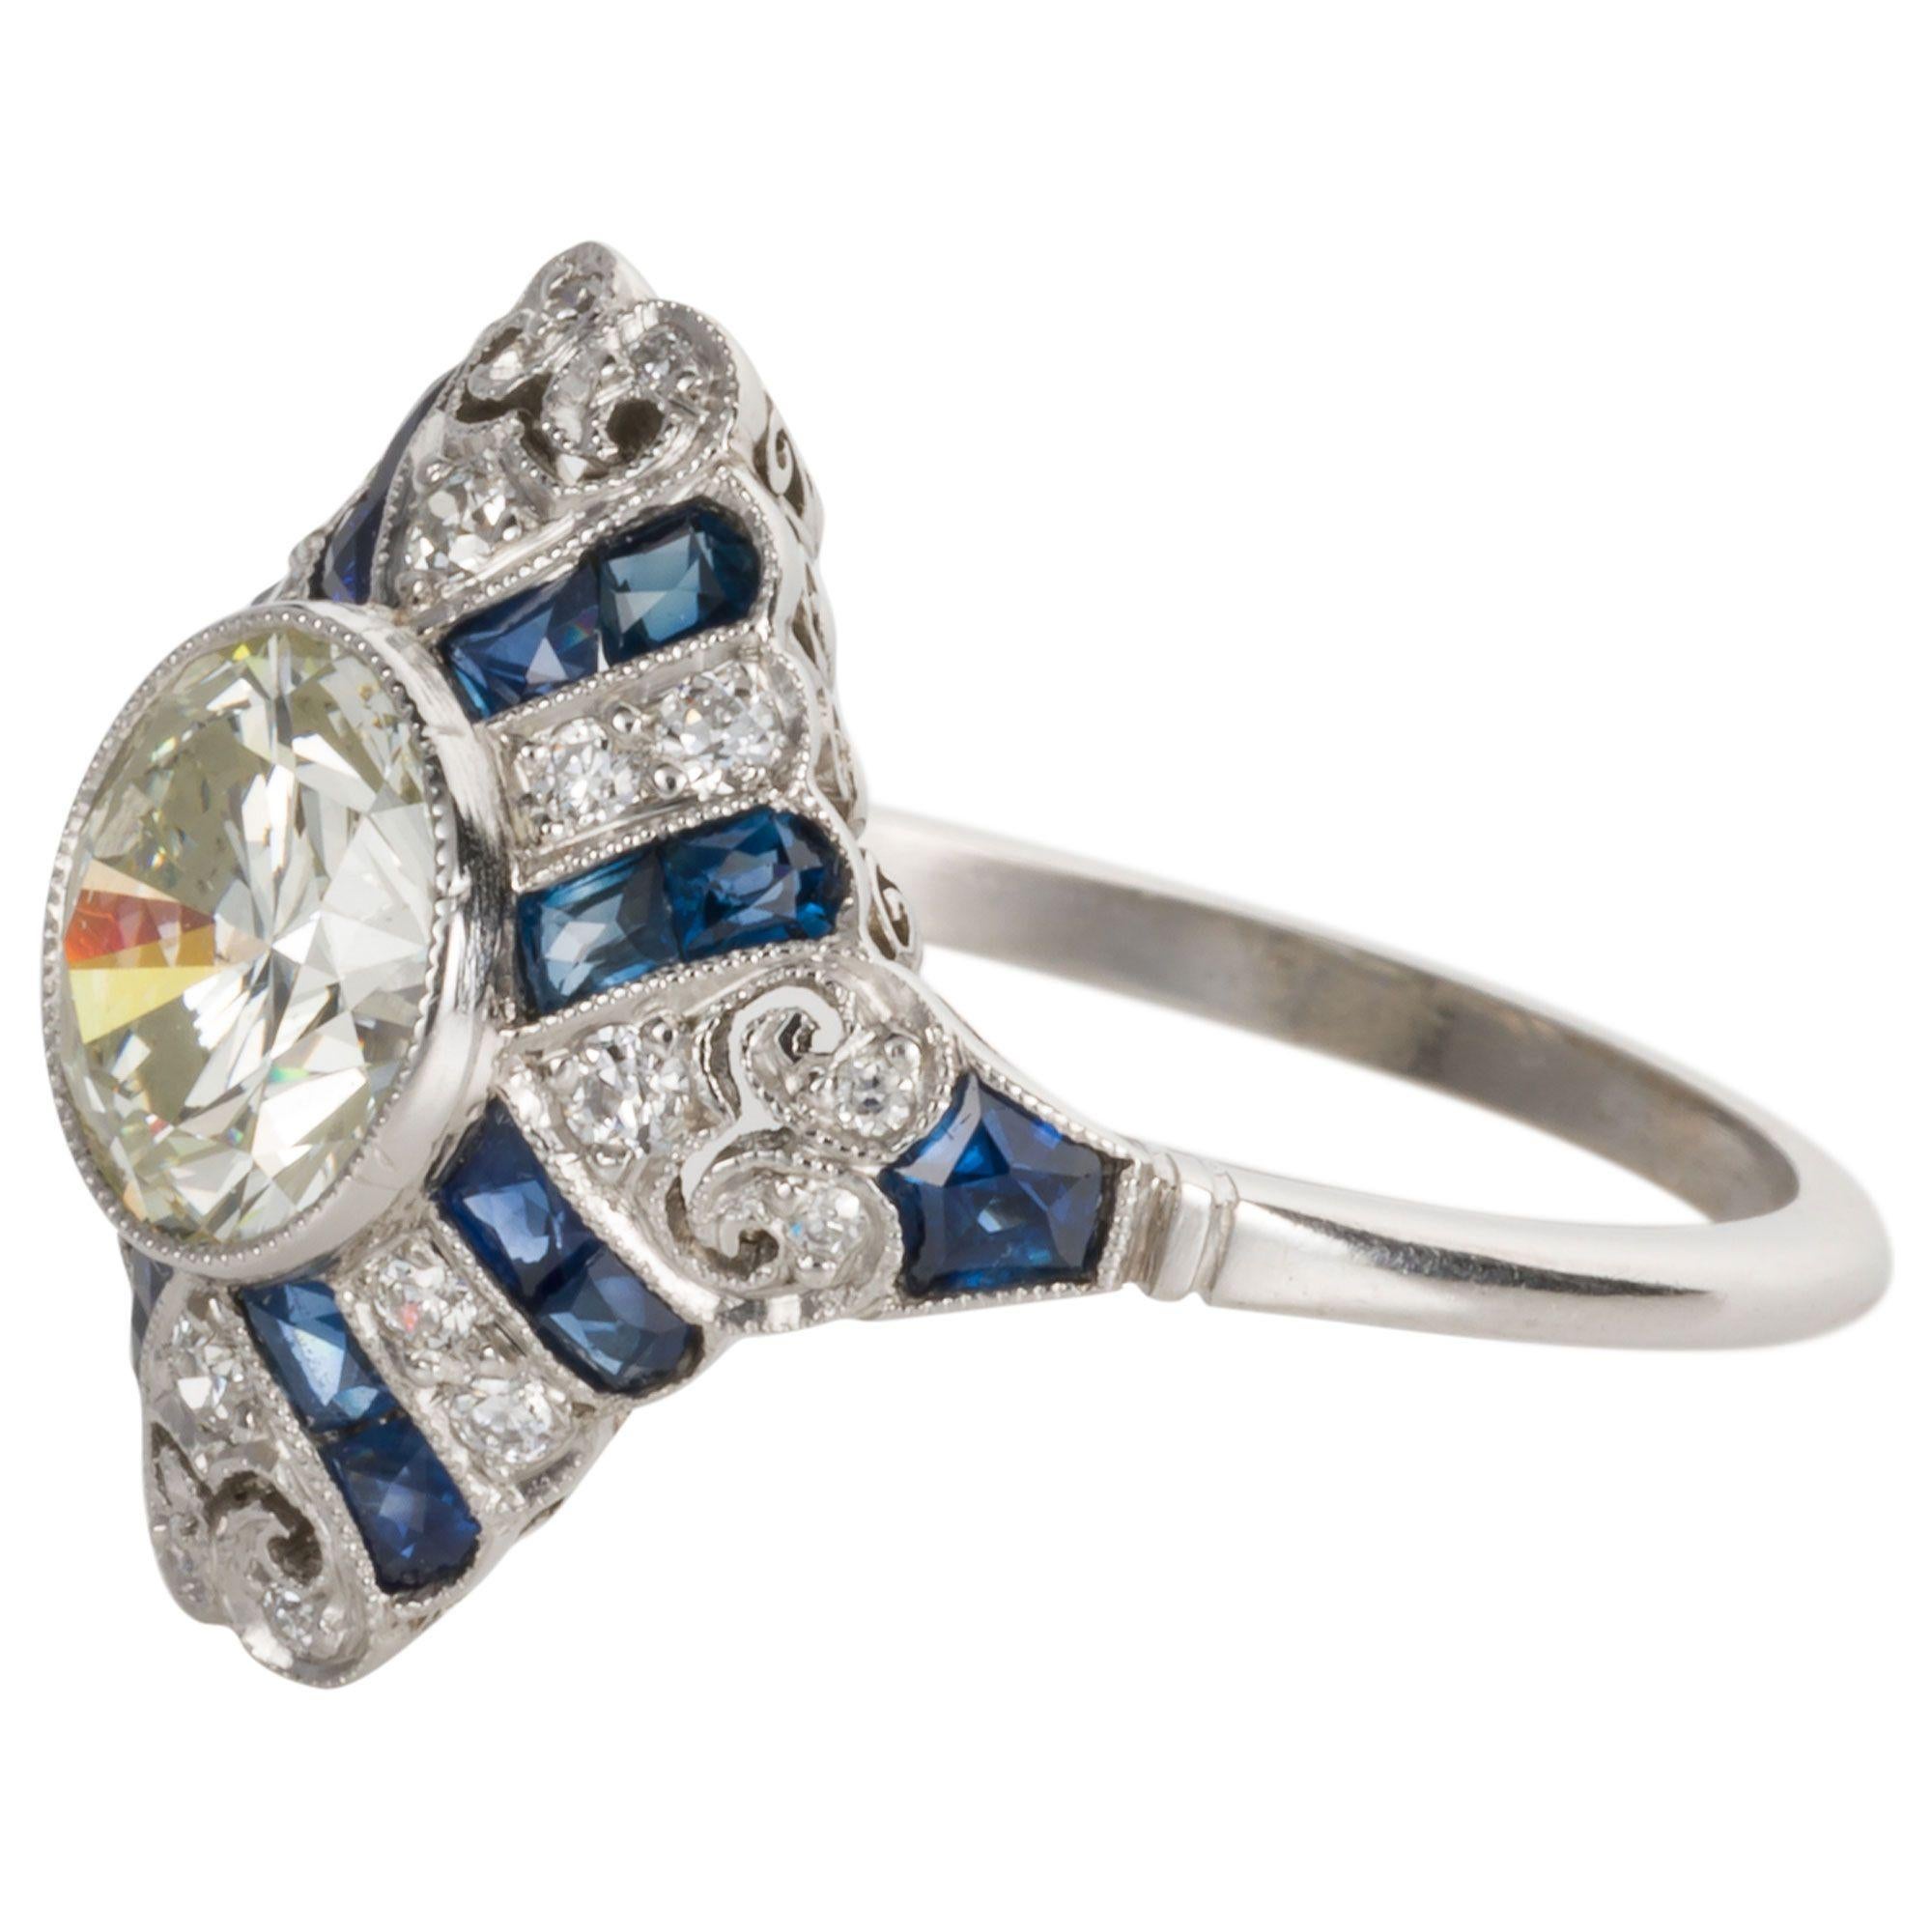 1.52 Carat Old European Cut Diamond and Sapphire Art Deco Inspired Ring For Sale 2